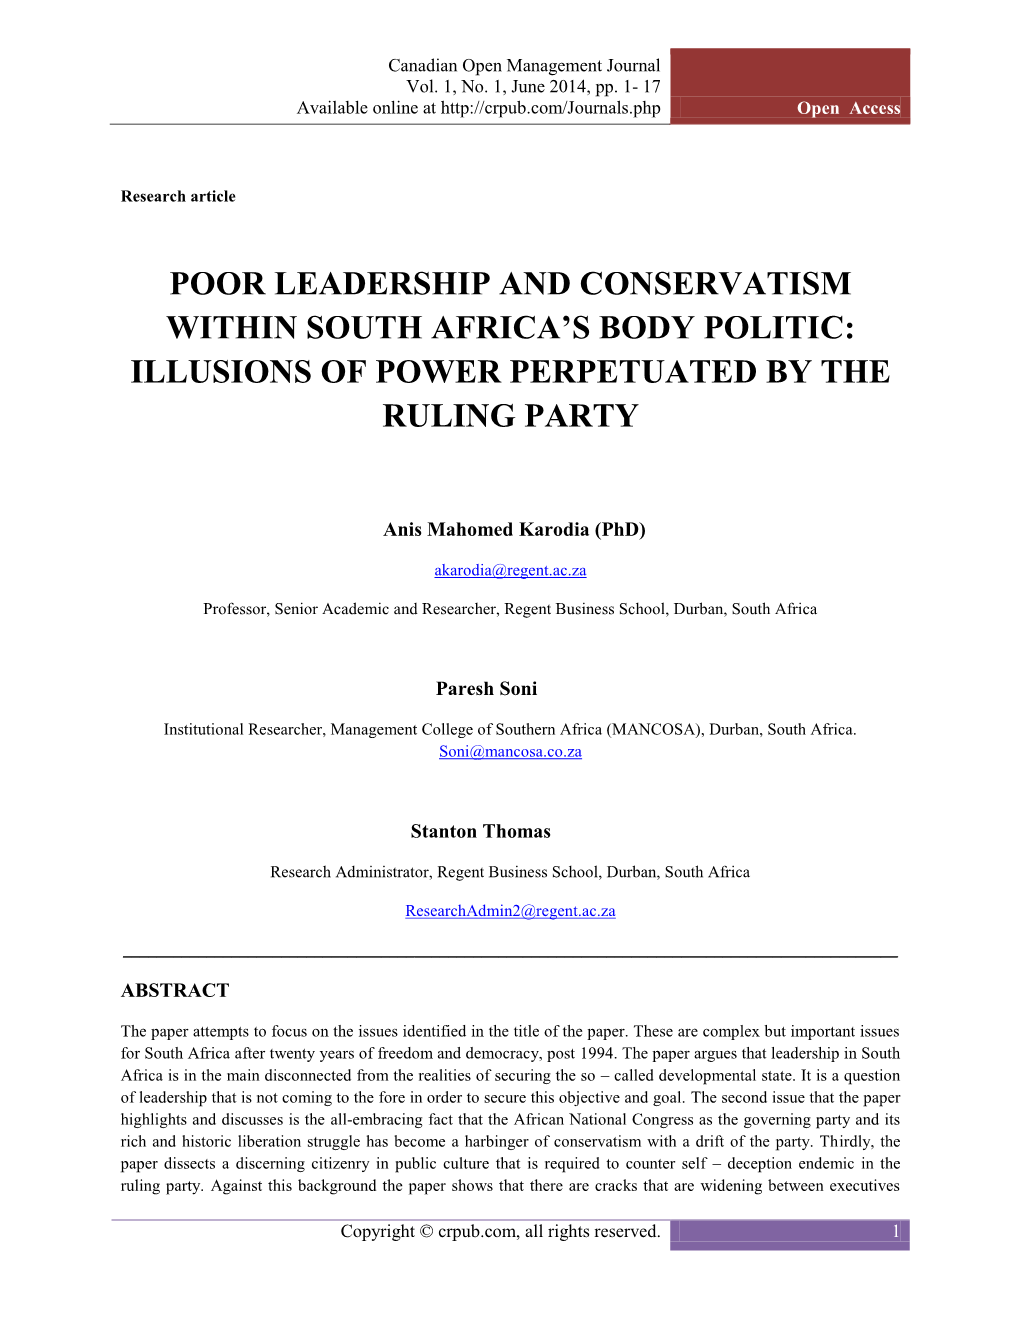 Poor Leadership and Conservatism Within South Africa's Body Politic